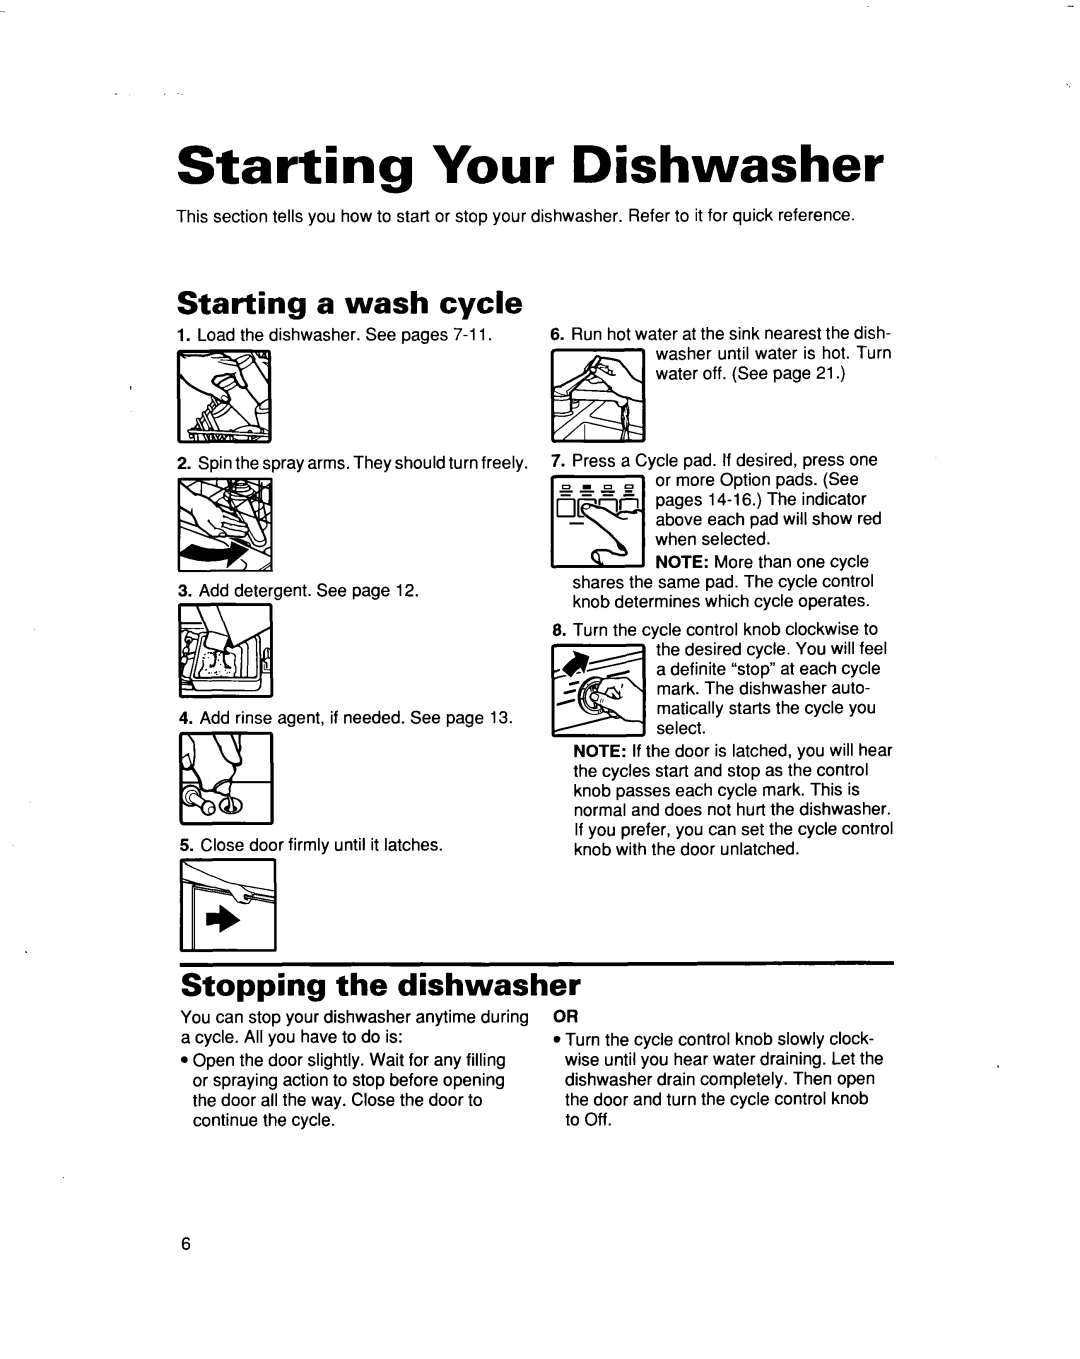 Whirlpool 915 warranty Starting Your Dishwasher, Starting a wash cycle, Stopping the dishwasher 